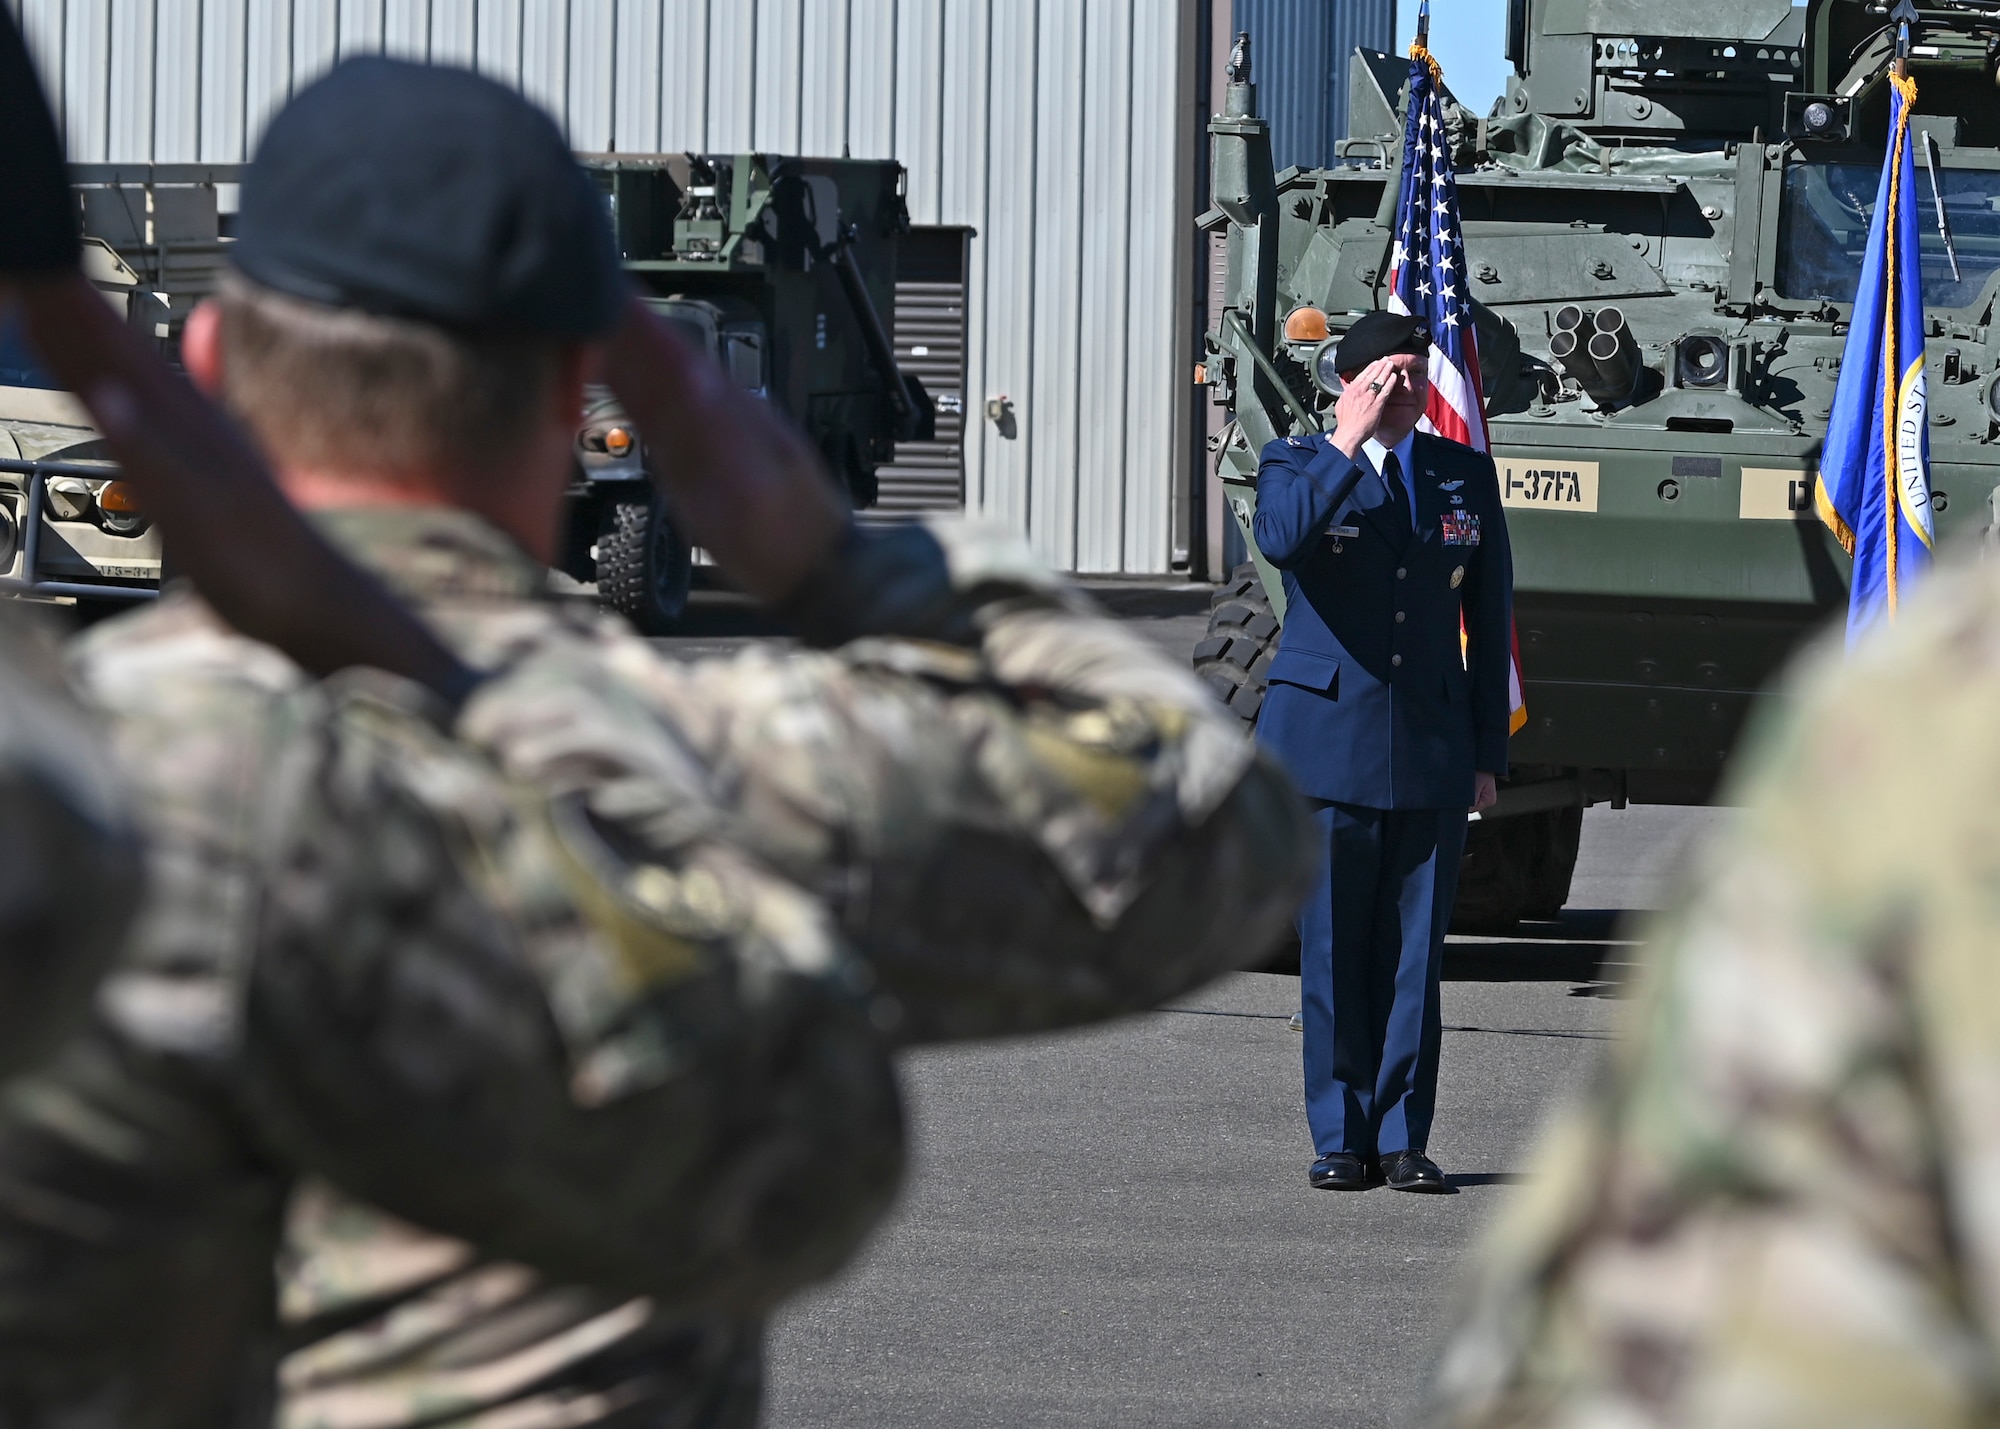 U.S. Air Force Col. John Blocher, incoming commander of the 1st Air Support Operations Group, receives his first salute from the 1st ASOG during a change of command ceremony at Joint Base Lewis-McChord, Washington, August 15, 2022. The 1st ASOG provides an Air Support Operations Center, Tactical Air Control Parties and Battlefield Weather Teams to Army combat units at multiple echelons including United States Army Pacific, I Corps, and nine aviation, airborne, infantry and Stryker brigade combat teams of the 2nd and 25th Infantry Divisions. (U.S. Air Force photo by Senior Airman Callie Norton)